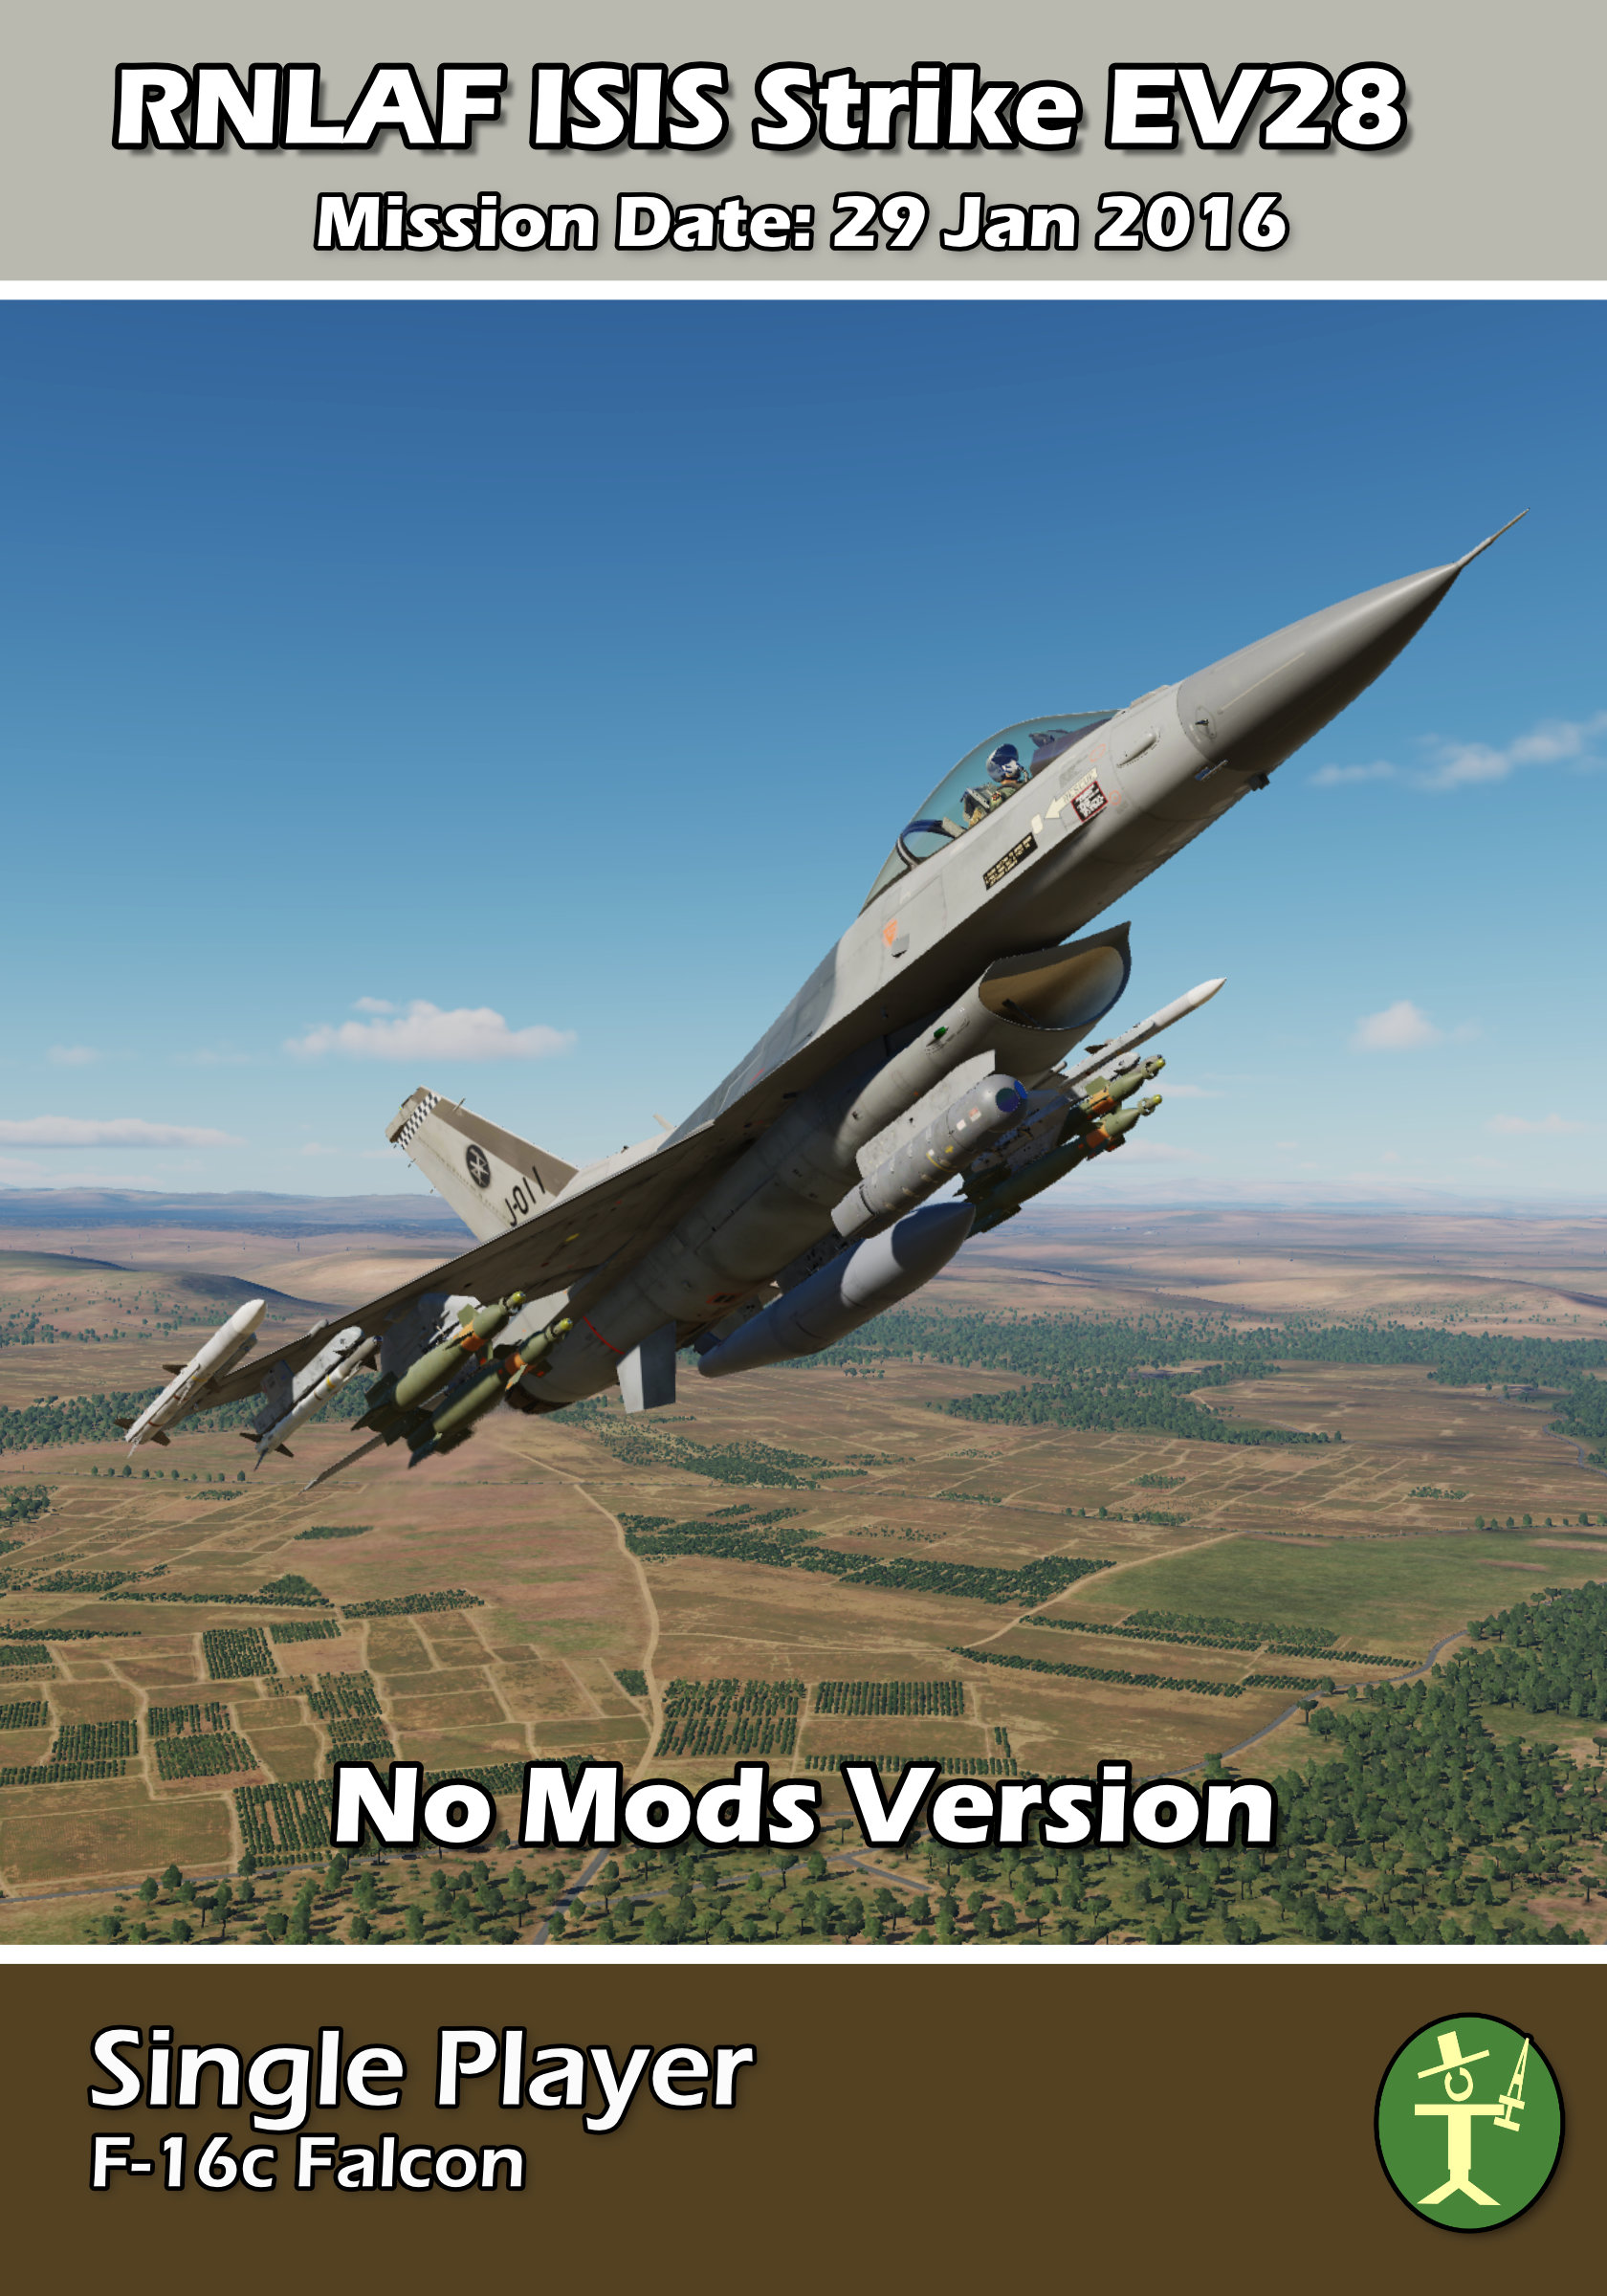 RNLAF F16 Surgical Strike on Syrian ISIS Compound *No Mods Version* - Single Player Mission